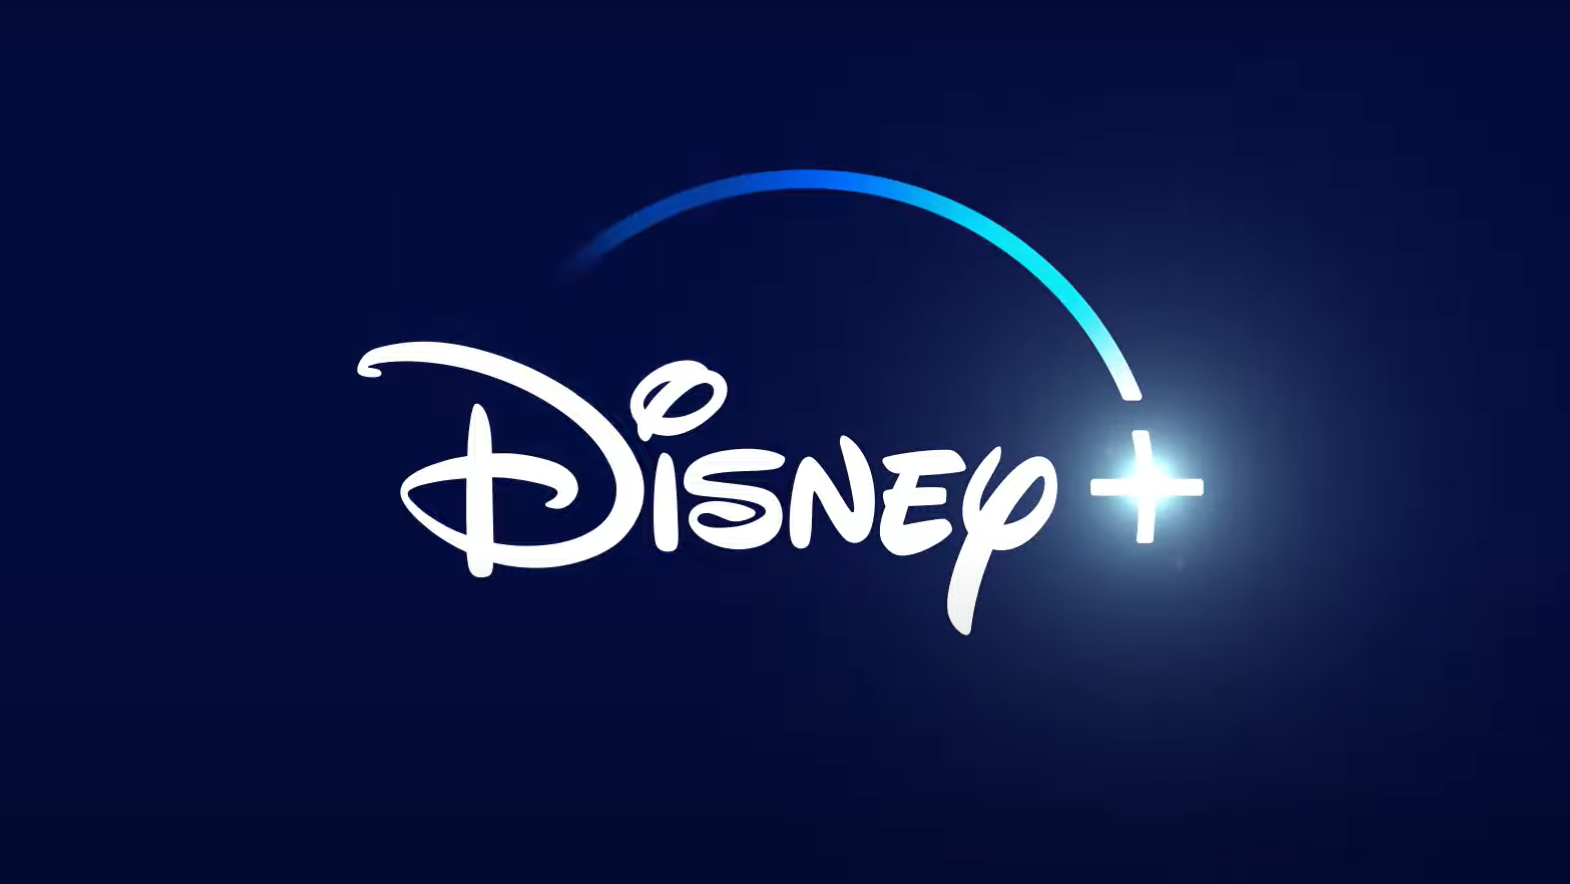 Disney+ notifies crackdown on password sharing I Inquirer USA